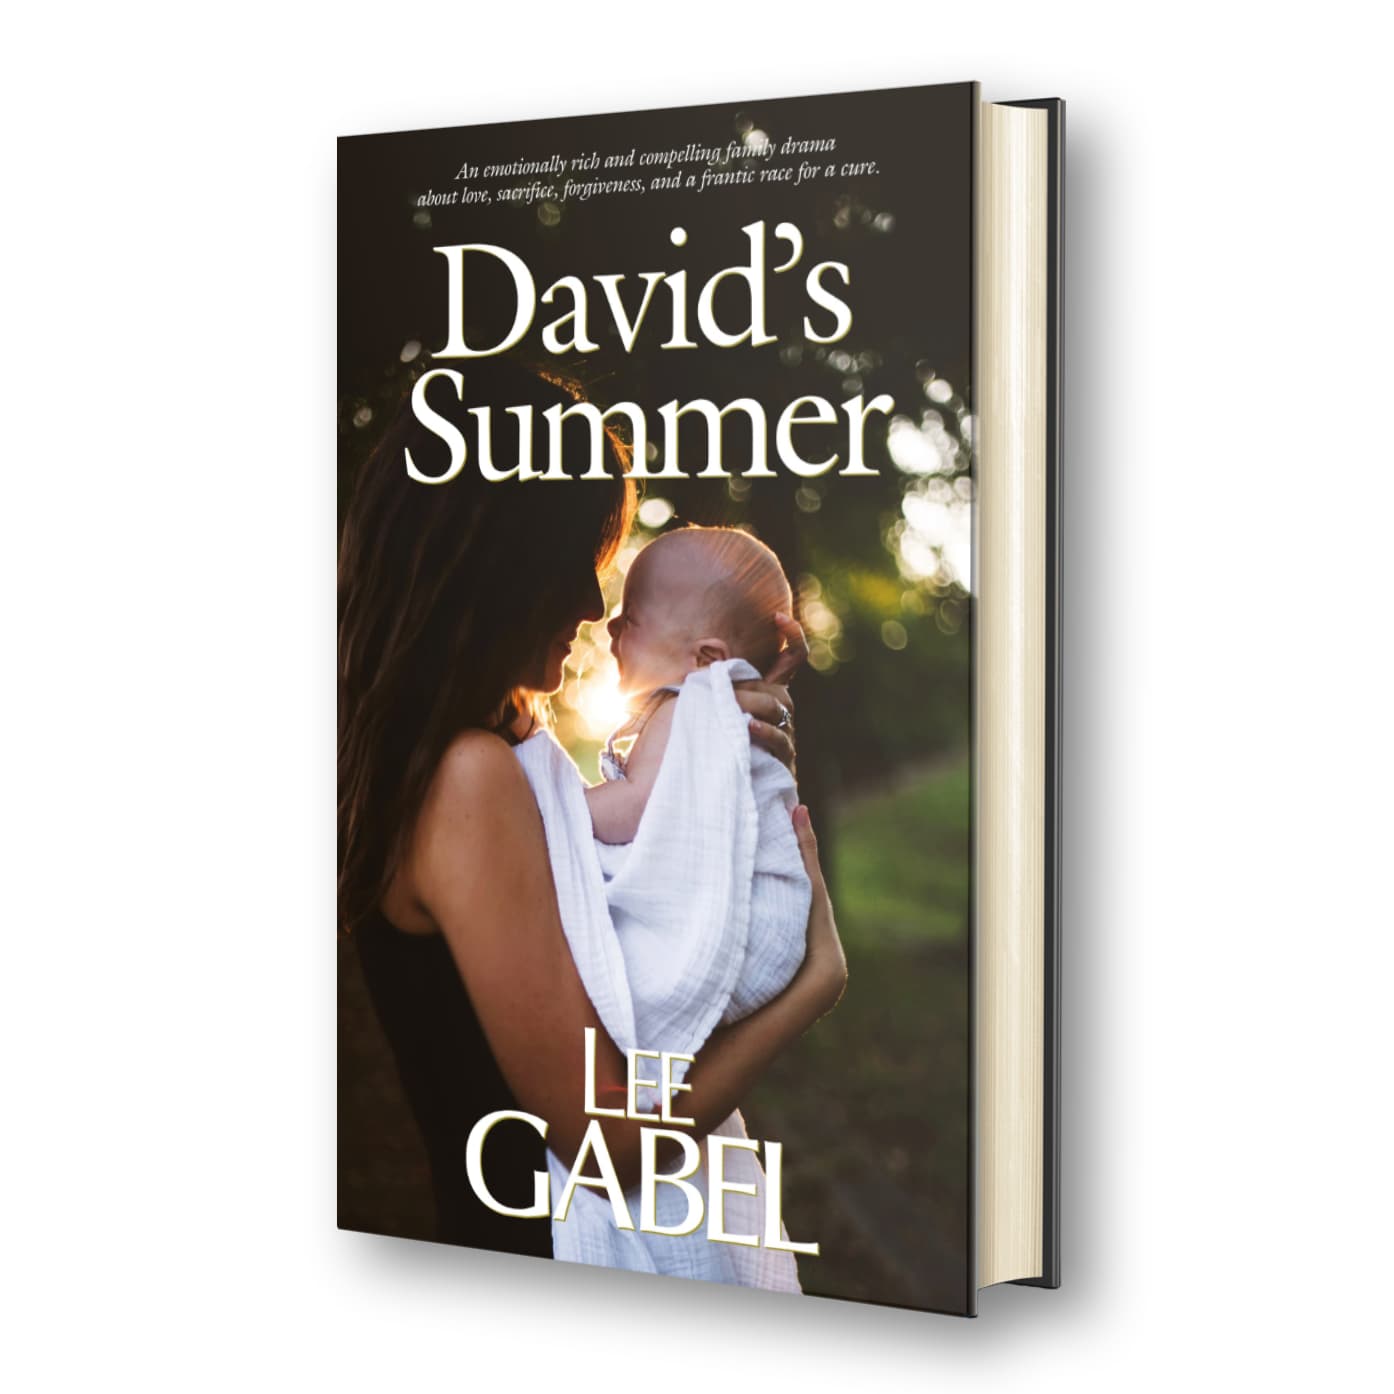 David's Summer virtual hardcover image (318 pages.)